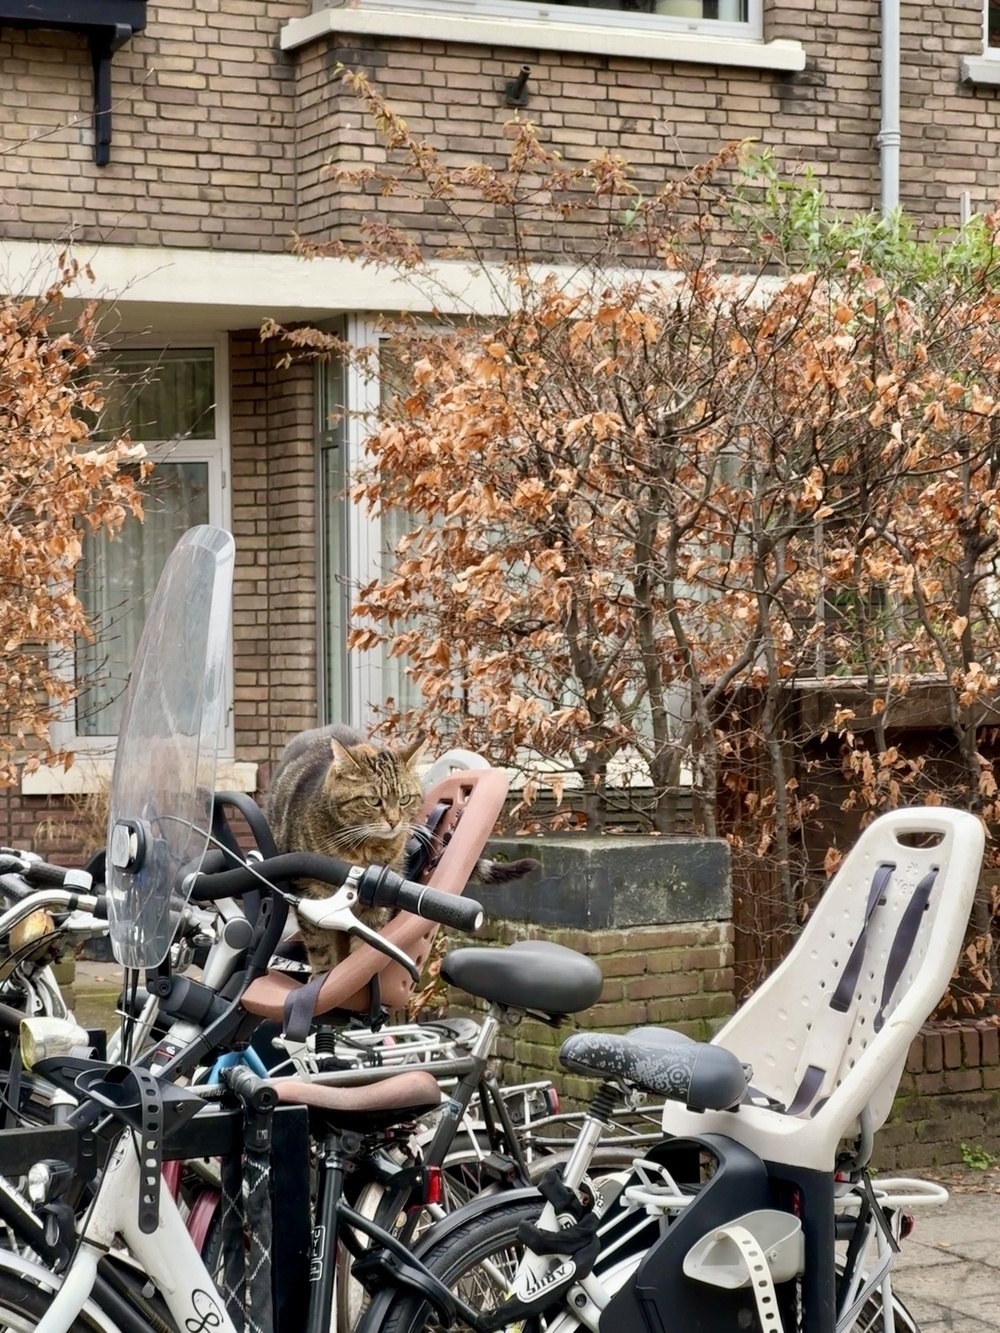 Auto-generated description: A cat is sitting on a bicycle seat in front of a building with bare shrubs and brown brick walls.